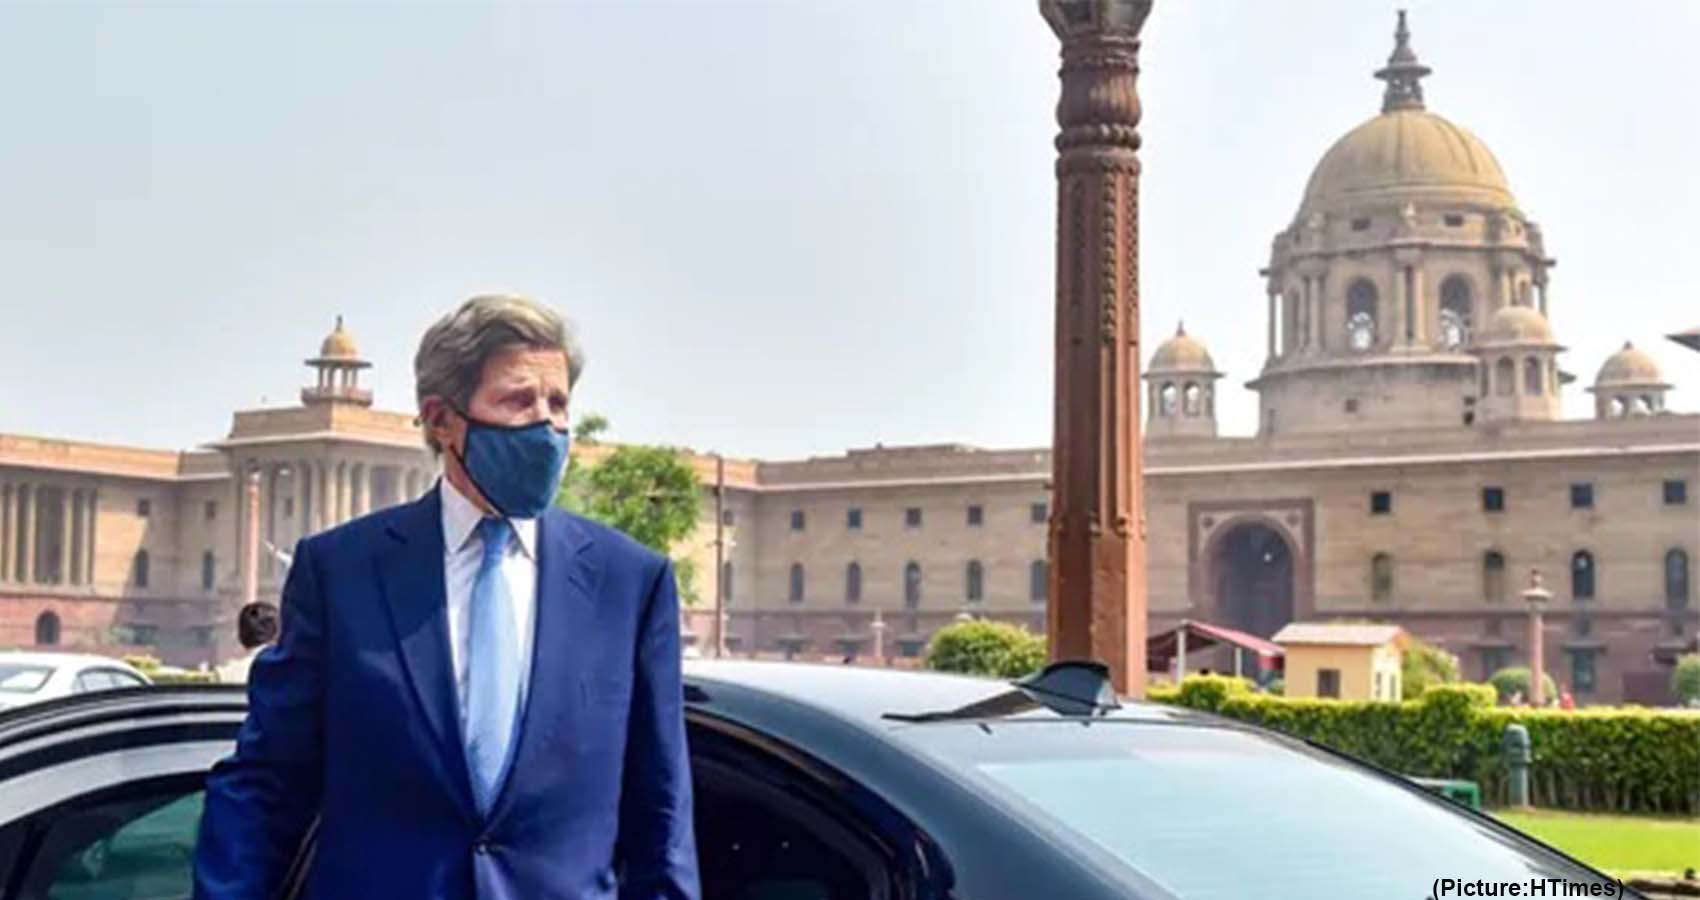 John Kerry Lauds India’s Efforts To Address Climate Change